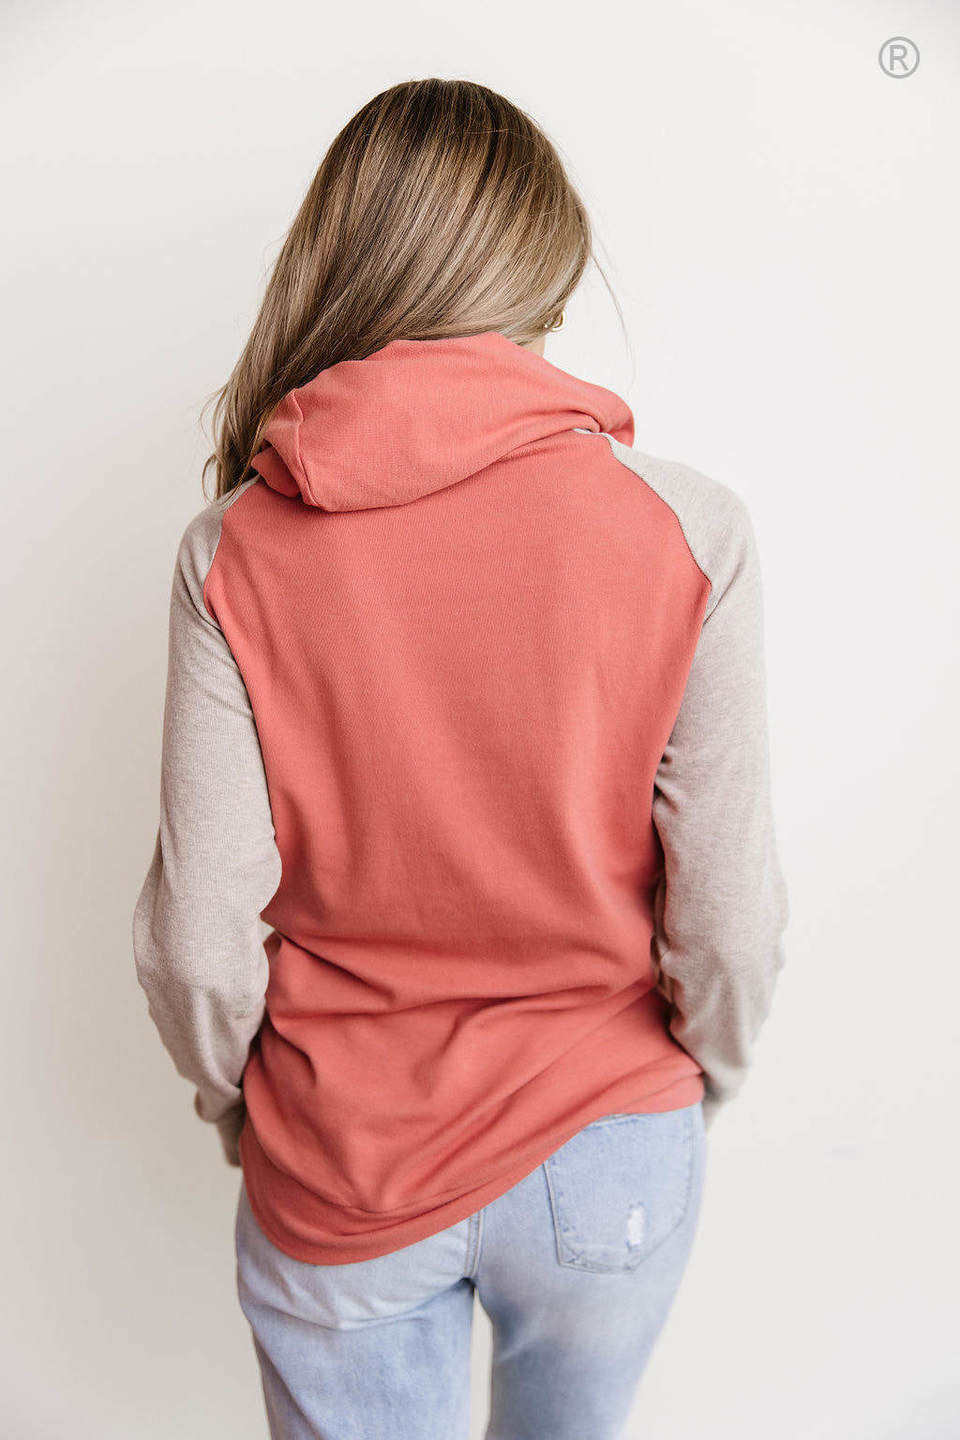 Ampersand Simply Spring DoubleHood